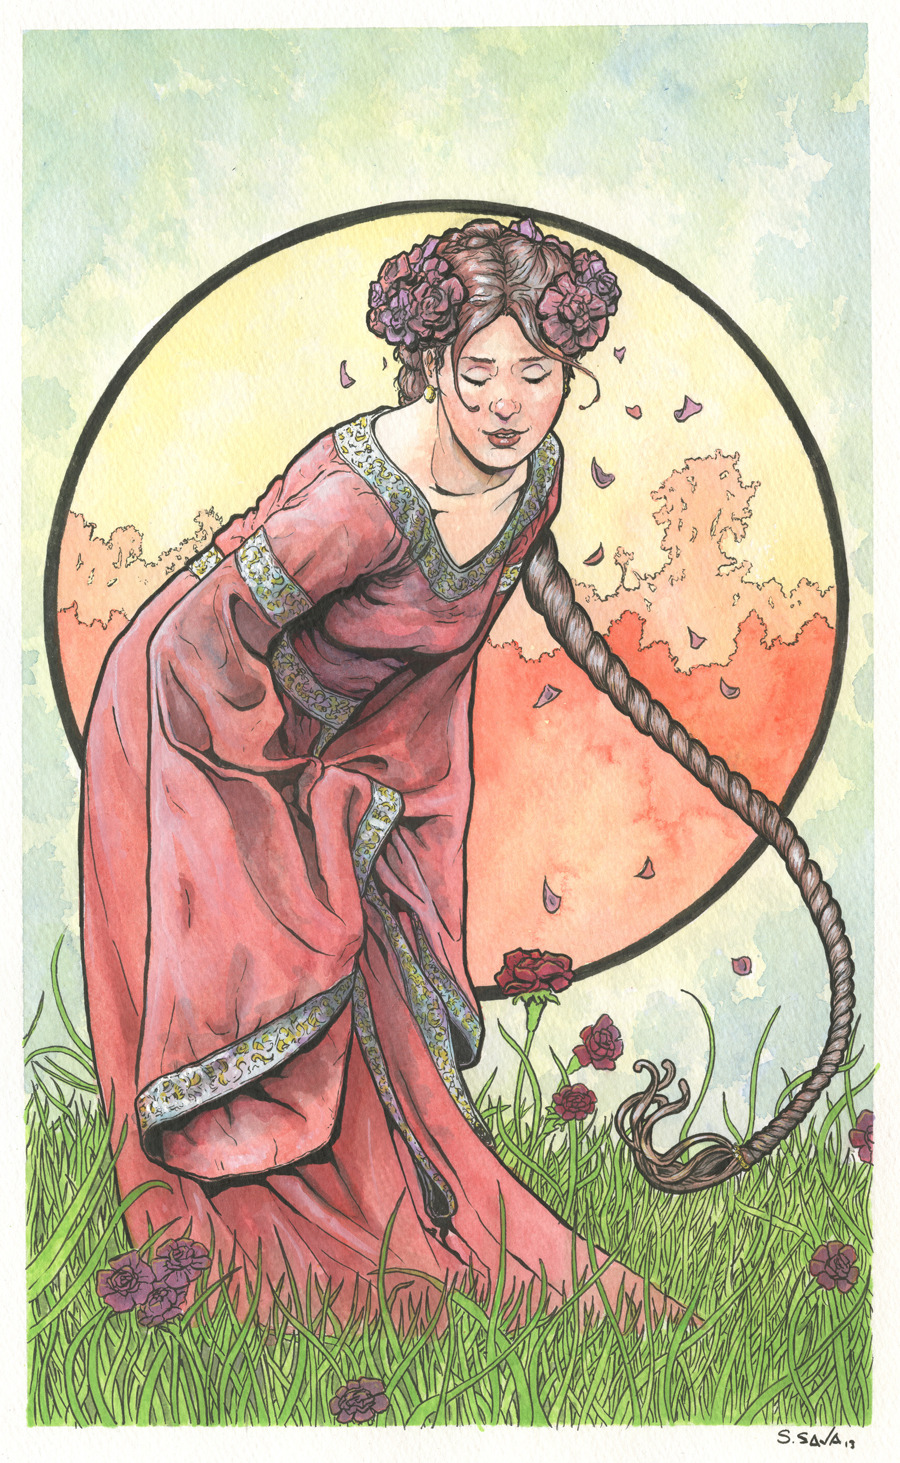 This is the 14th Art Nouveau/Alphonse Mucha inspired watercolor painting in a series I&#8217;m producing.The painting is on 12x18 inch Strathmore Cold Press watercolor paper. Done in watercolors and ink.Photo reference/inspiration from Magikstock (who temporarily has their stock photos offline)&#8230;http://magikstock.deviantart.com/Original paintings can be purchased here…http://www.etsy.com/shop/ScottChristianSava?section_id=11821287and Limited Edition Prints can be purchased here…http://www.etsy.com/shop/ScottChristianSava?section_id=11821297Thanks for looking!Scott